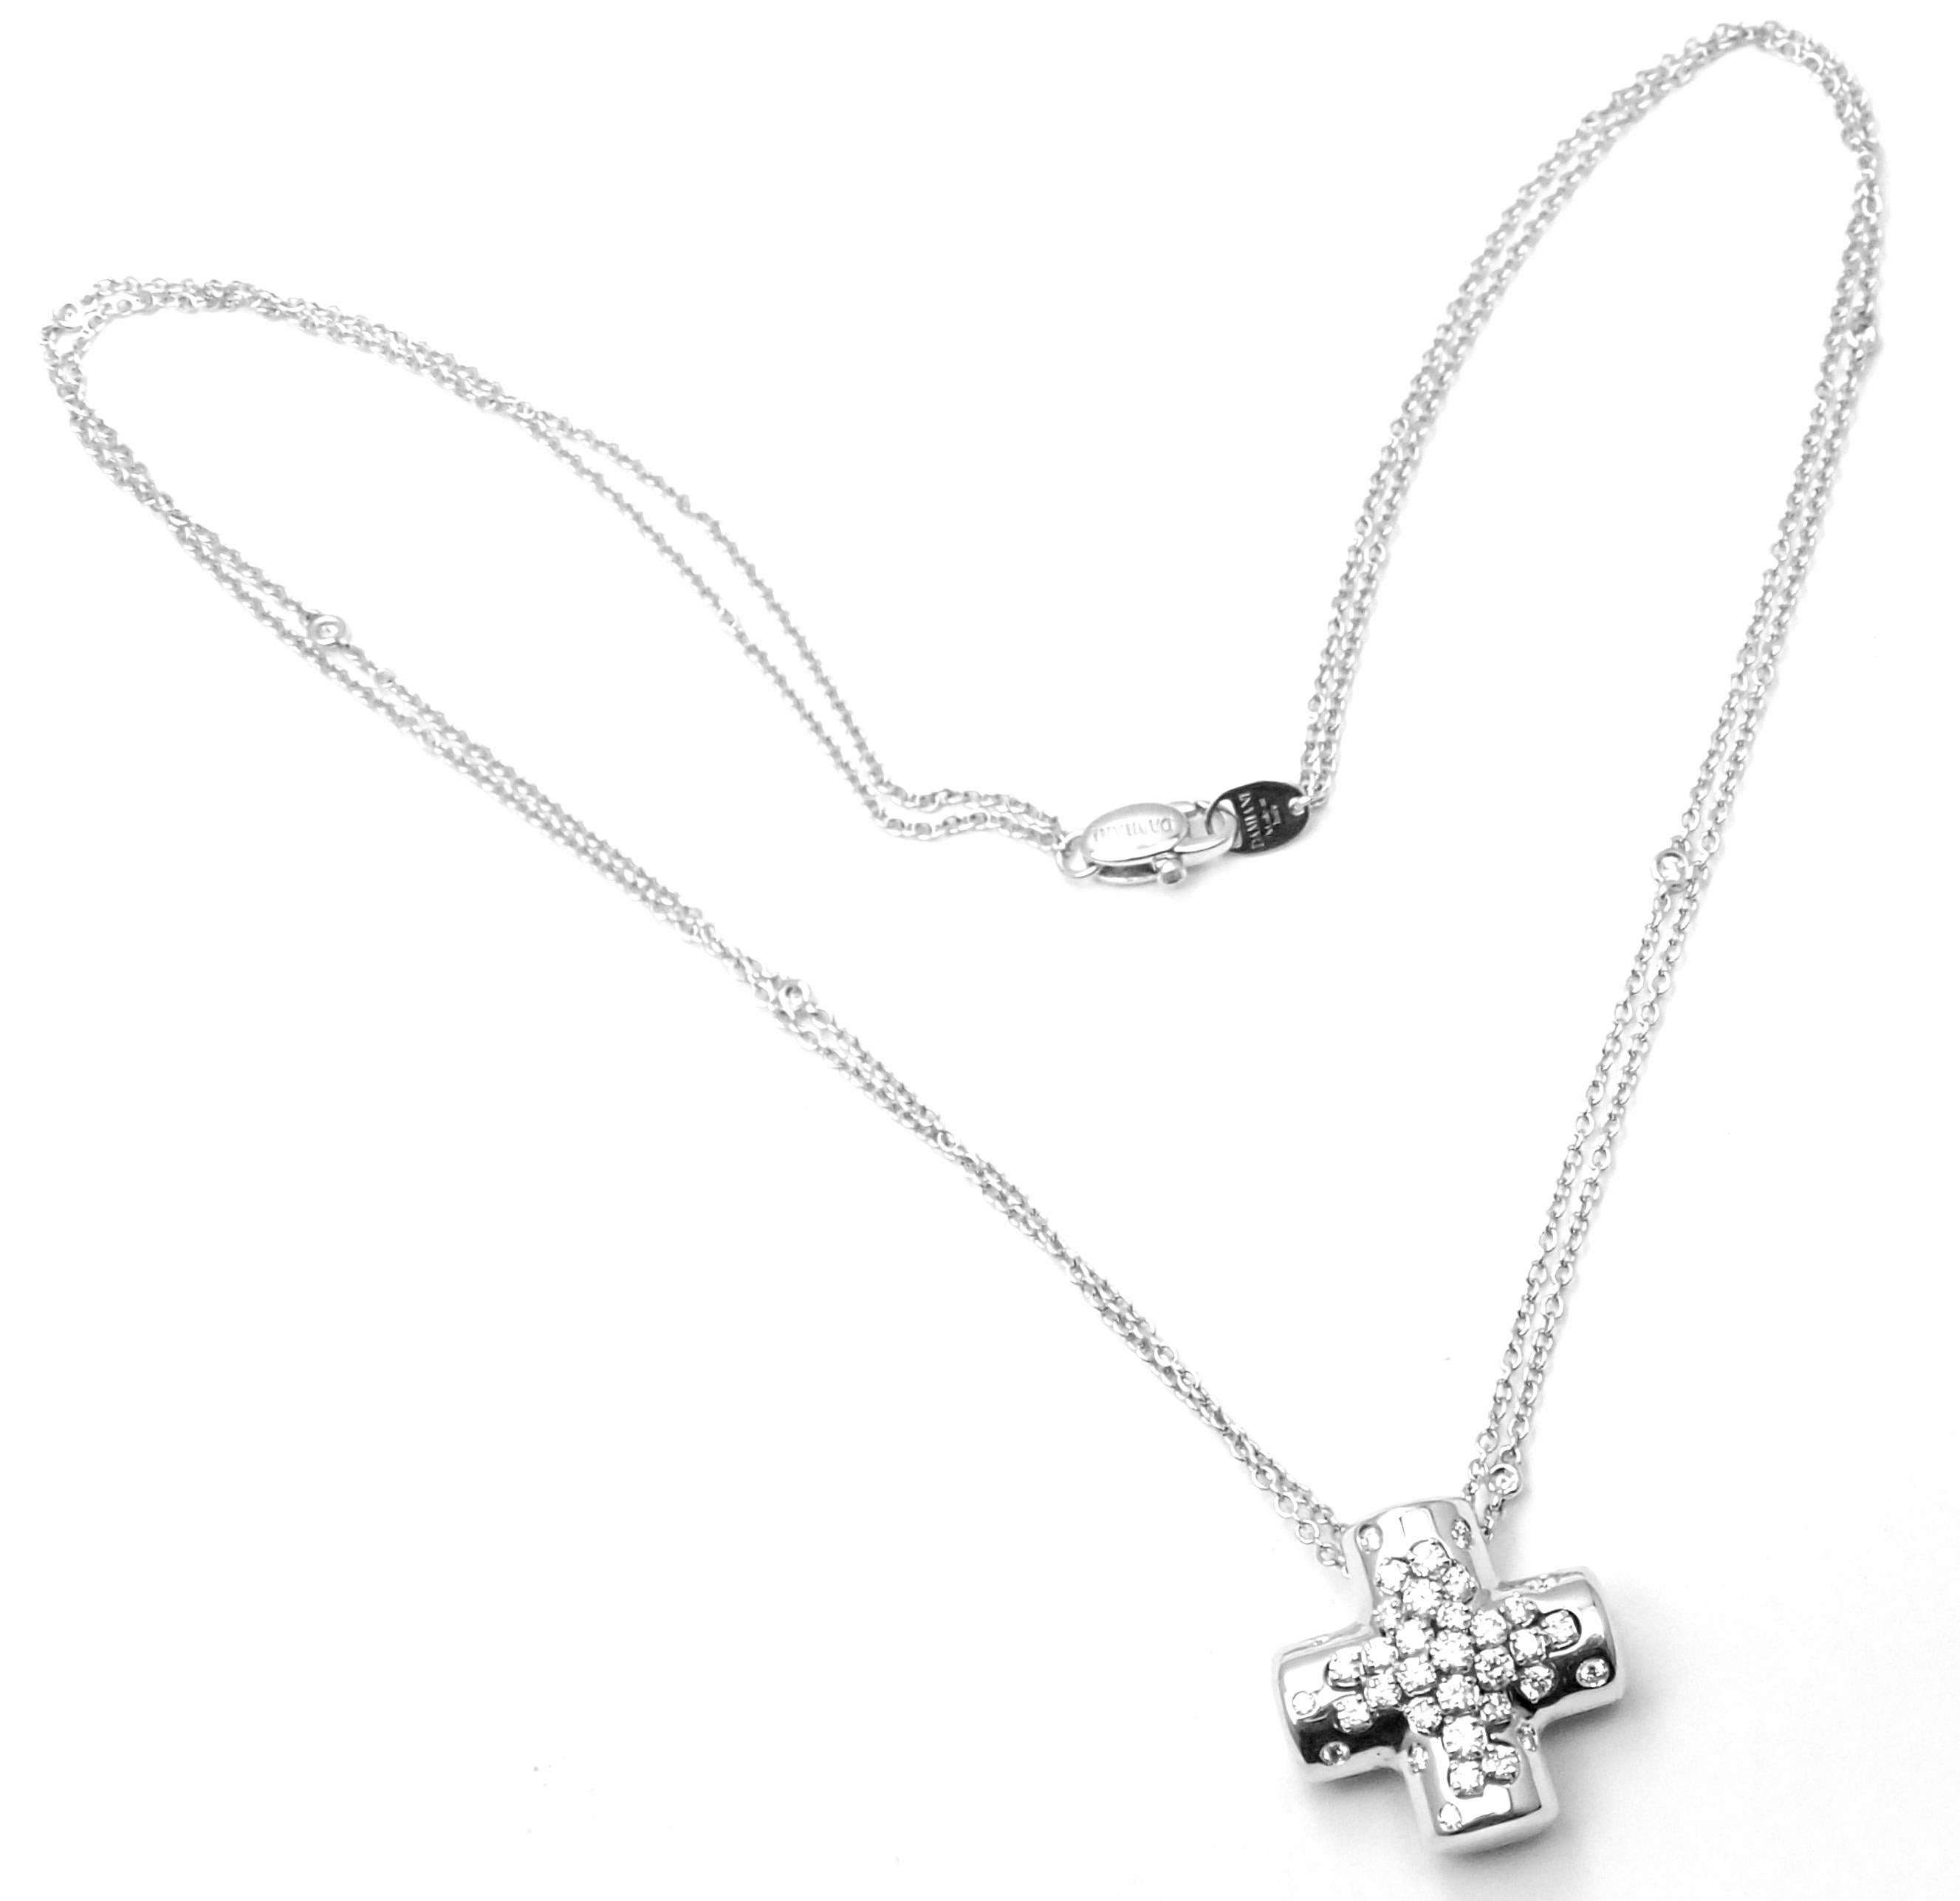 18k White Gold Diamond Cross Pendant Necklace by Damiani. 
With Round brilliant cut diamond E-G color, VS-SI clarity total weight approx. .92ct  
This necklace comes with Box, Certificate. Details: 
Measurements: 
Length: 18